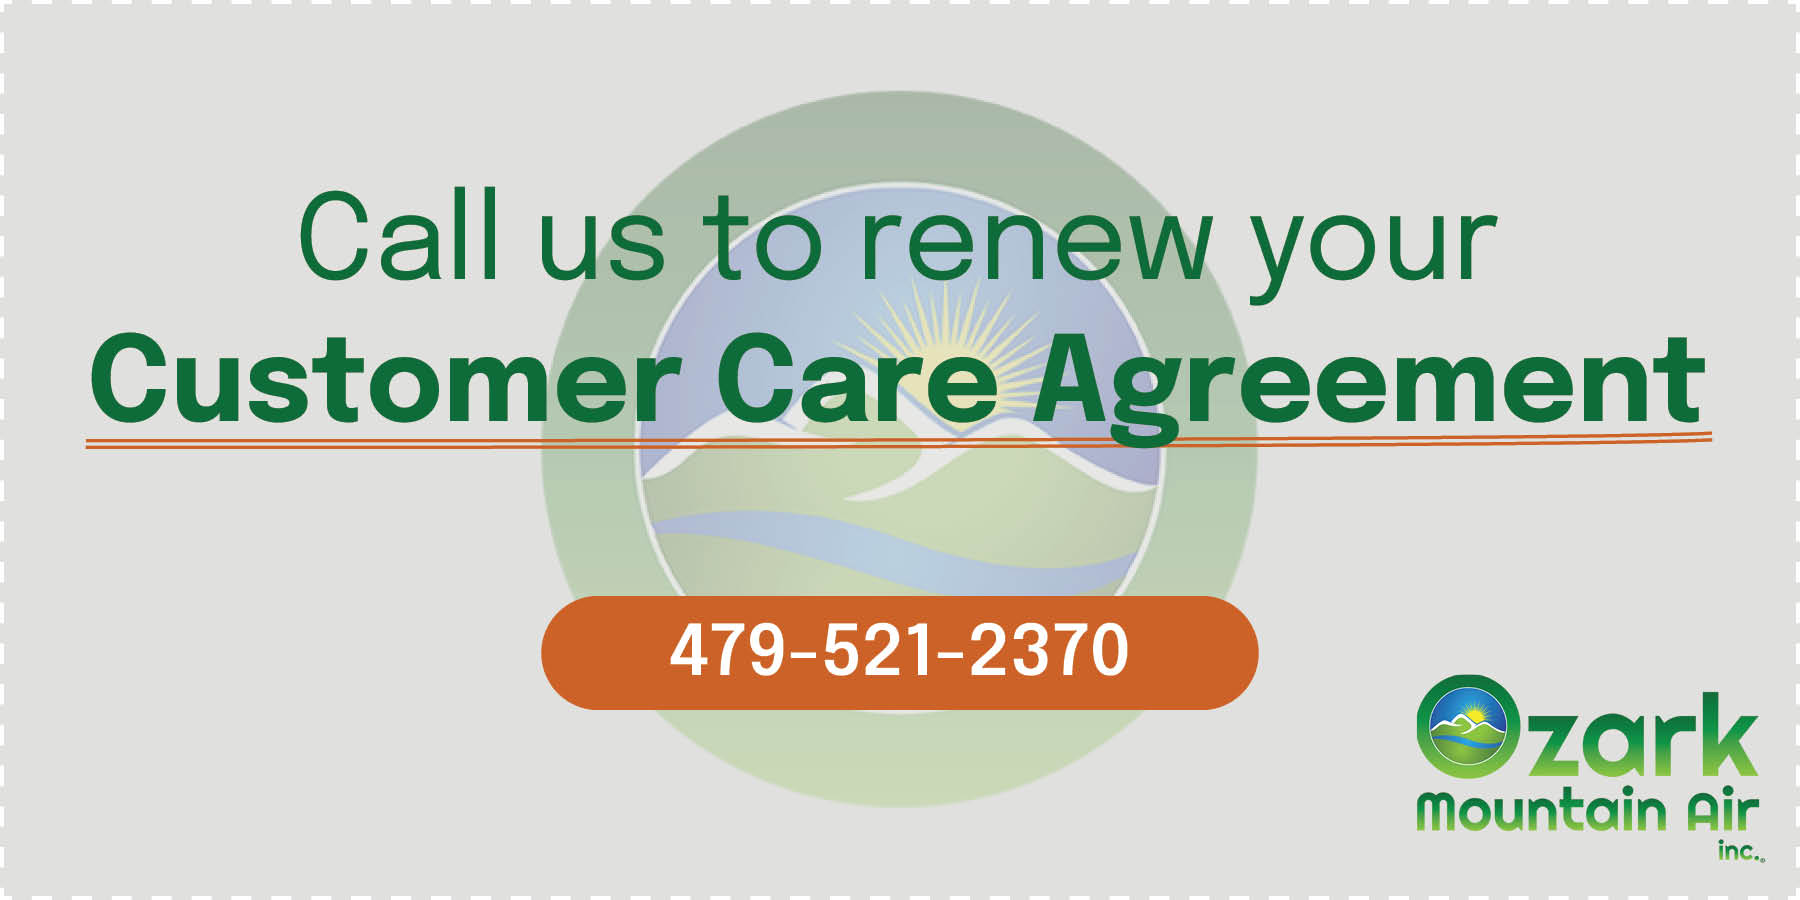 Call us to renew your Customer Care Agreement.